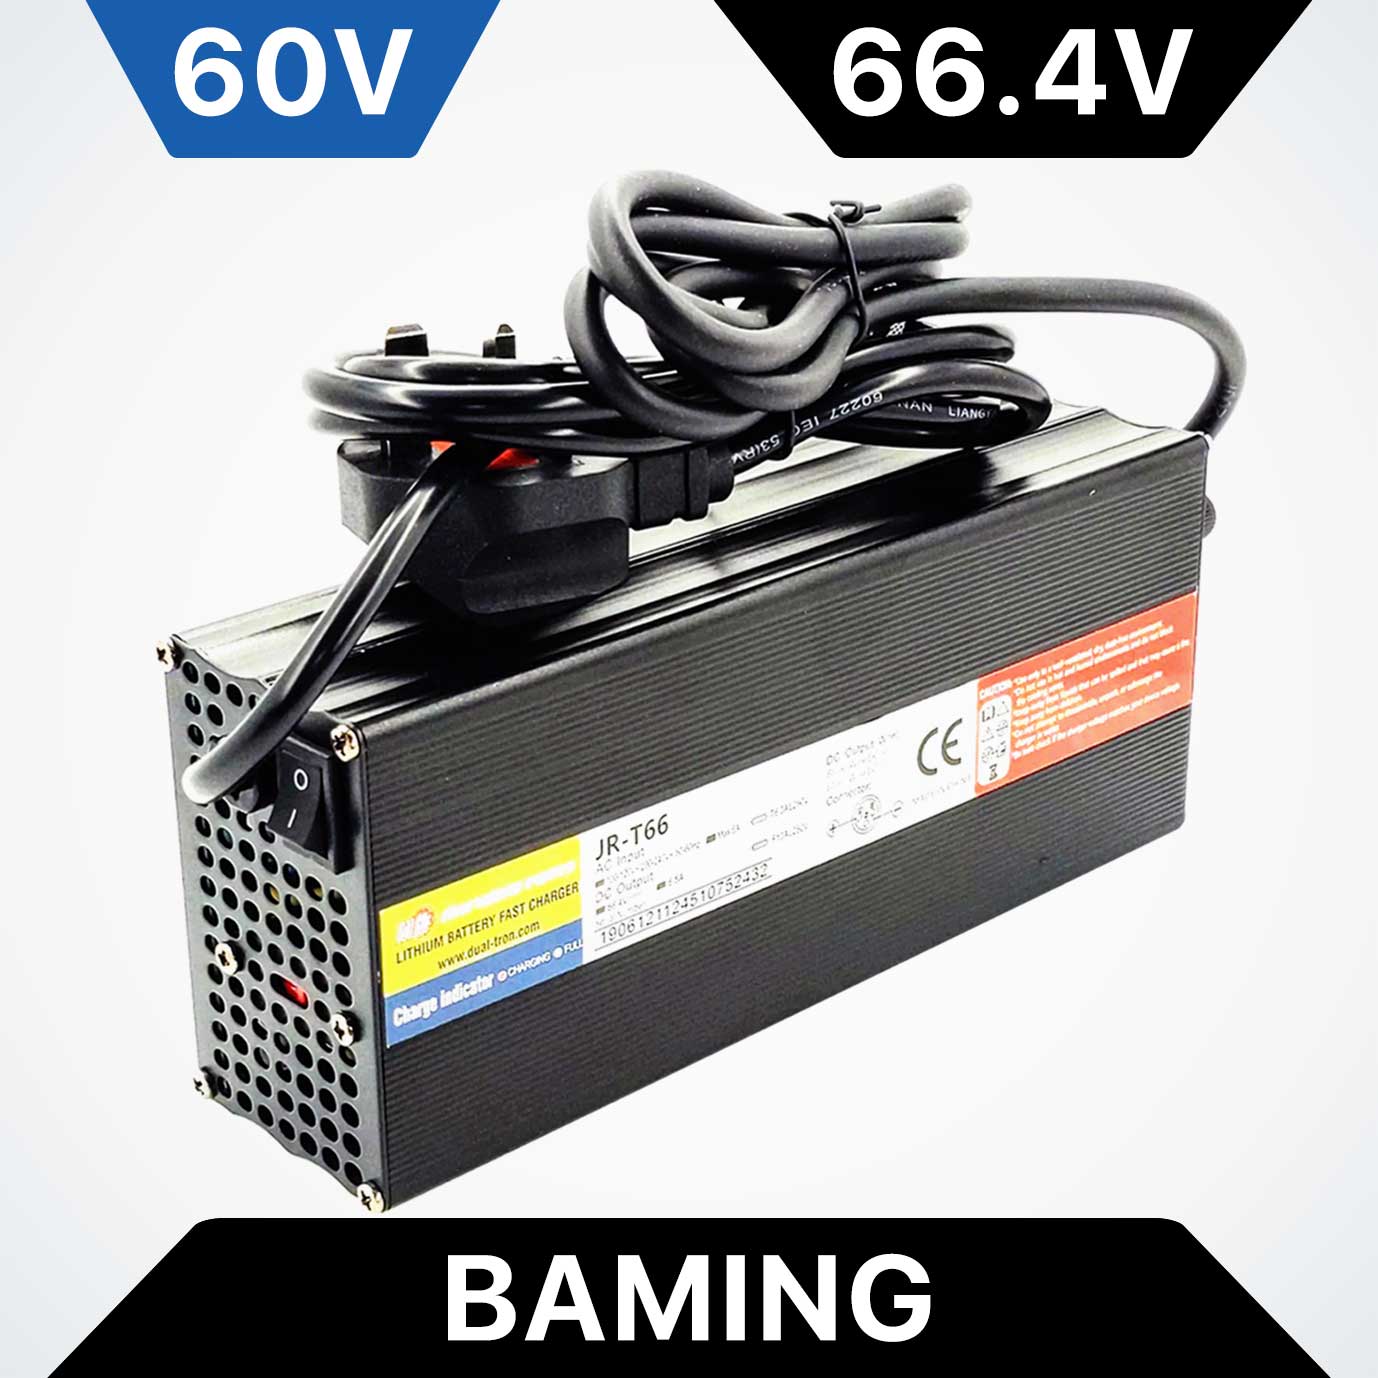 60V 6.5A Fast Charger for Dualtron, 66.4V Max, Baming Plug